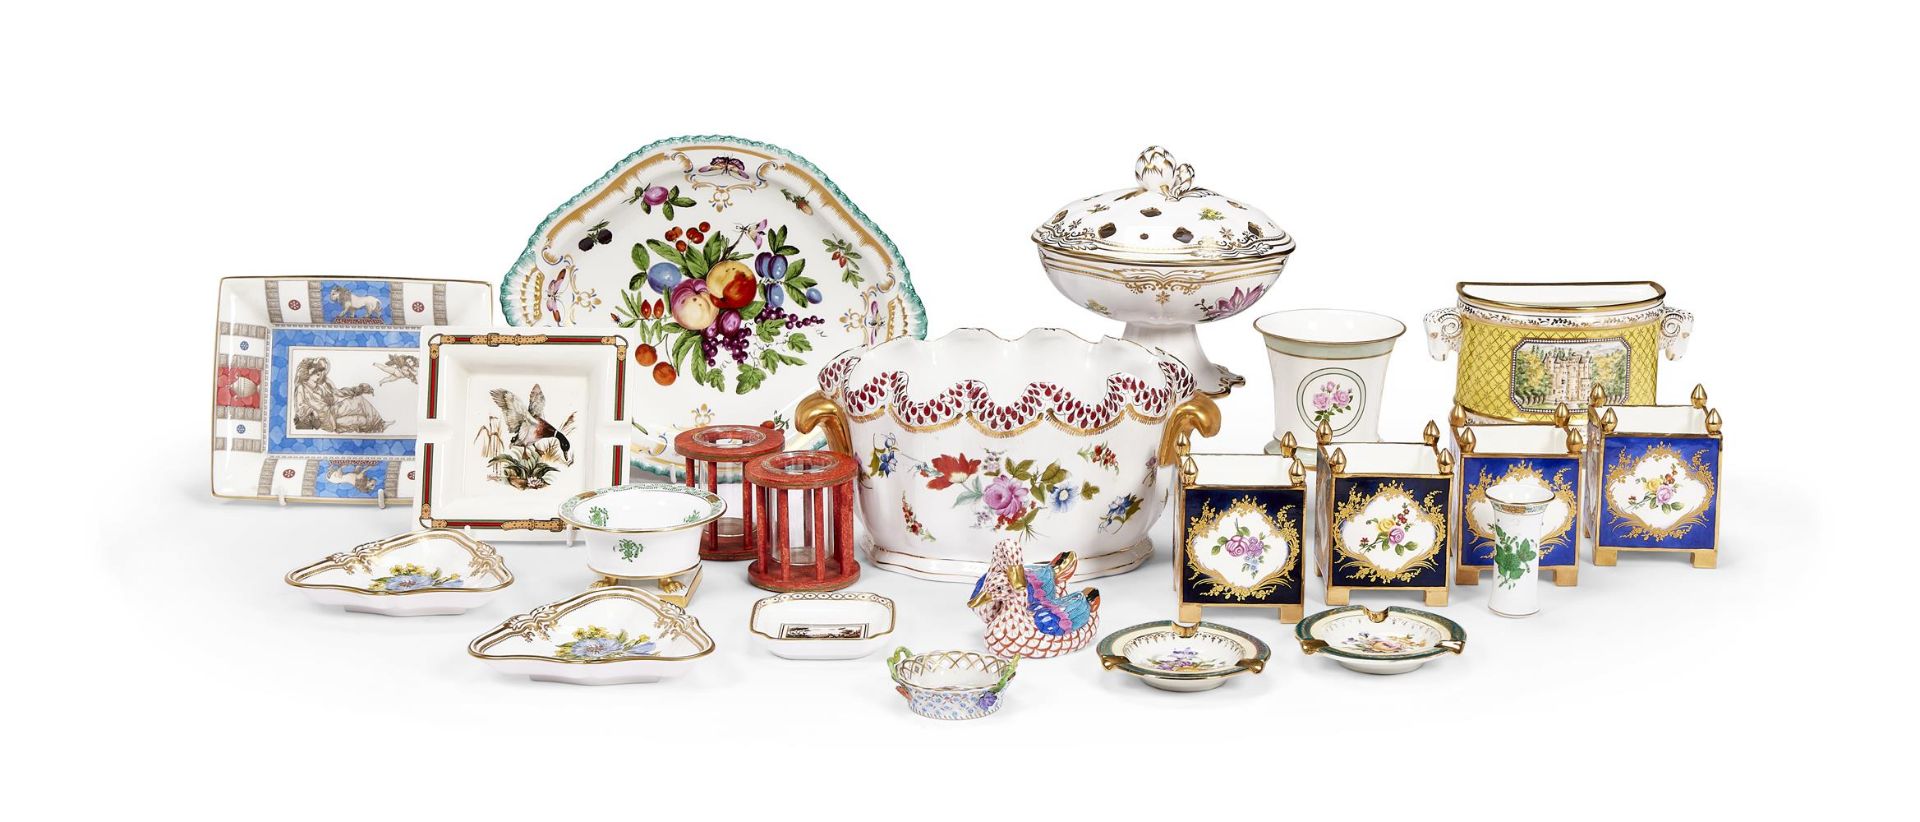 A GROUP OF MODERN PORCELAIN AFTER 18TH CENTURY EXAMPLES INCLUDING